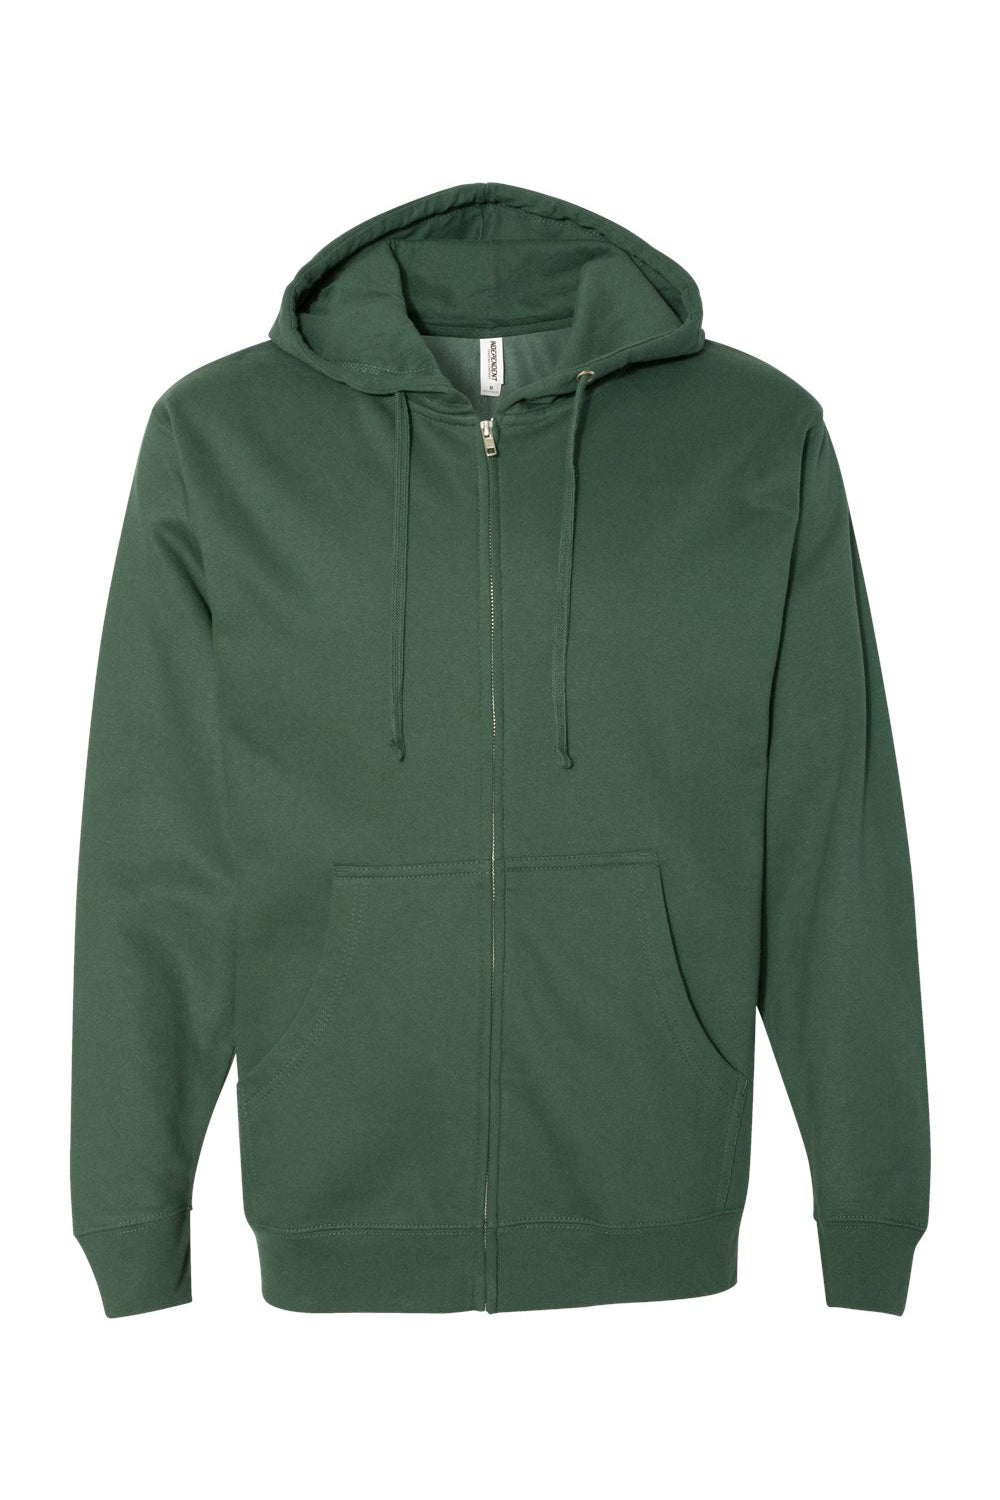 Independent Trading Co. SS4500Z Mens Full Zip Hooded Sweatshirt Hoodie Alpine Green Flat Front